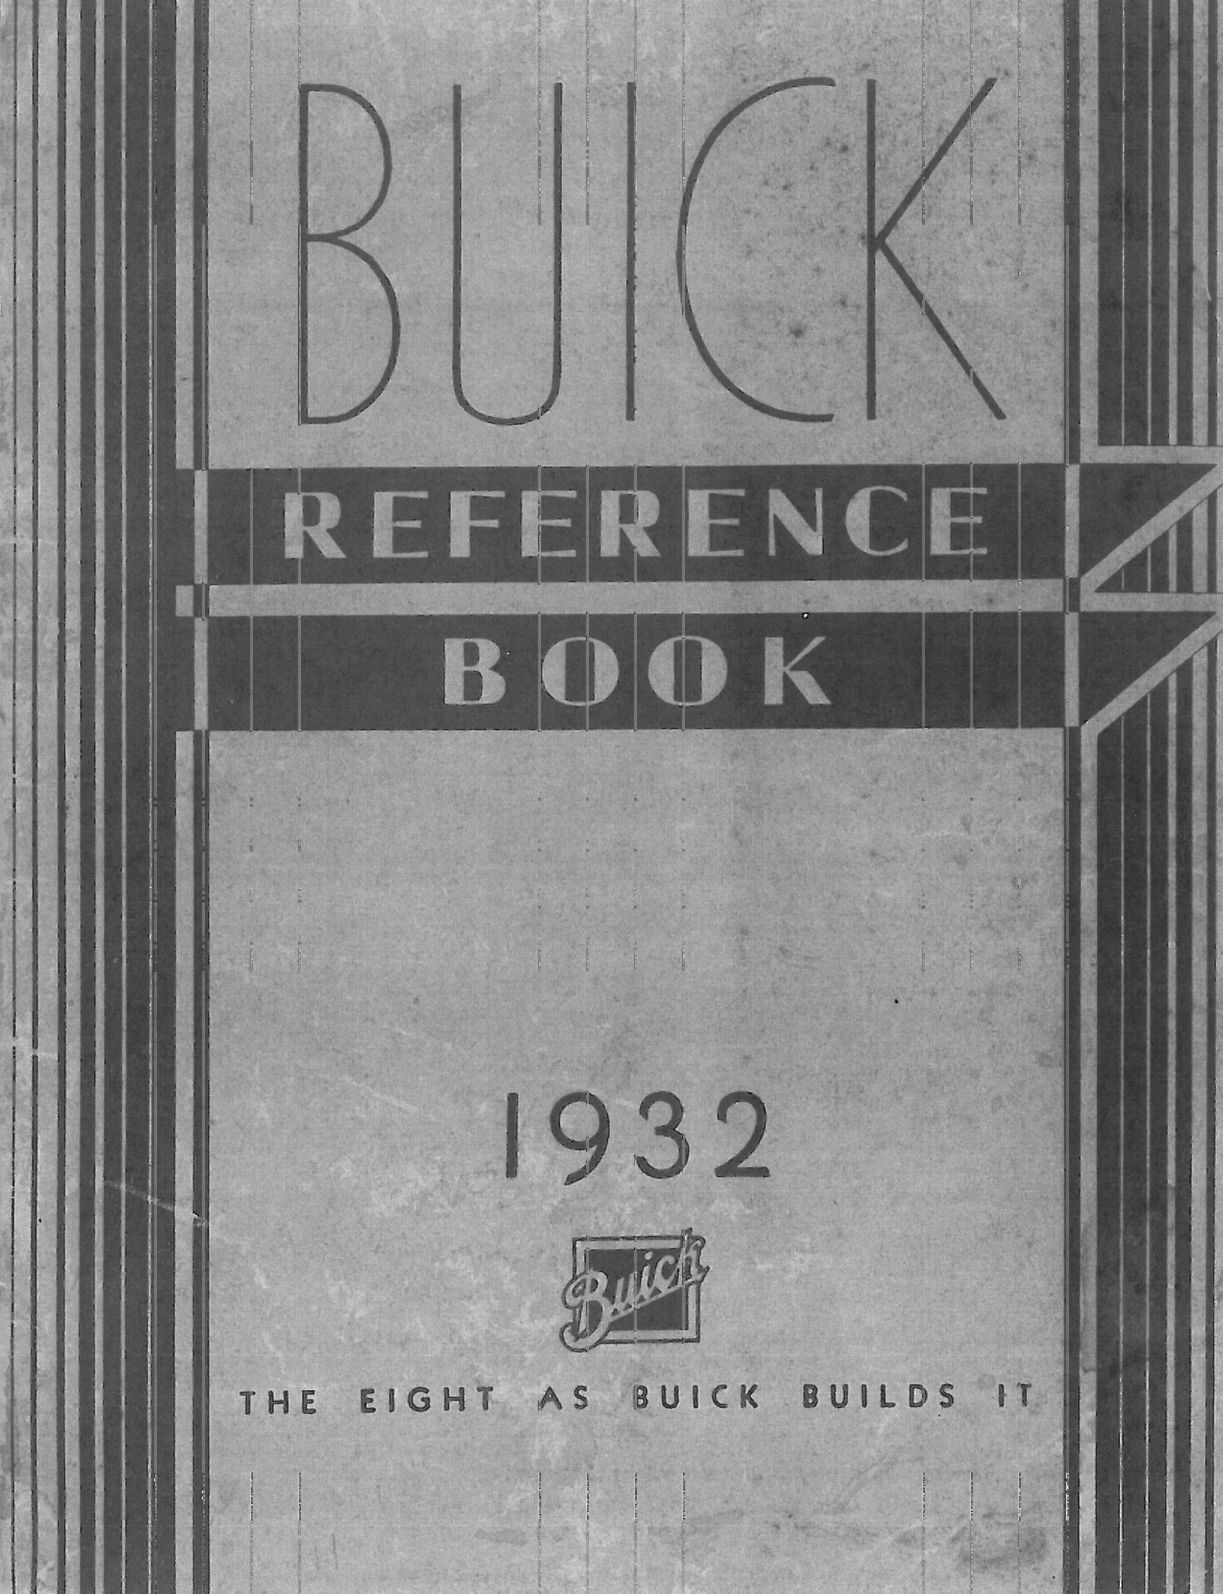 n_1932 Buick Reference Book-00.jpg